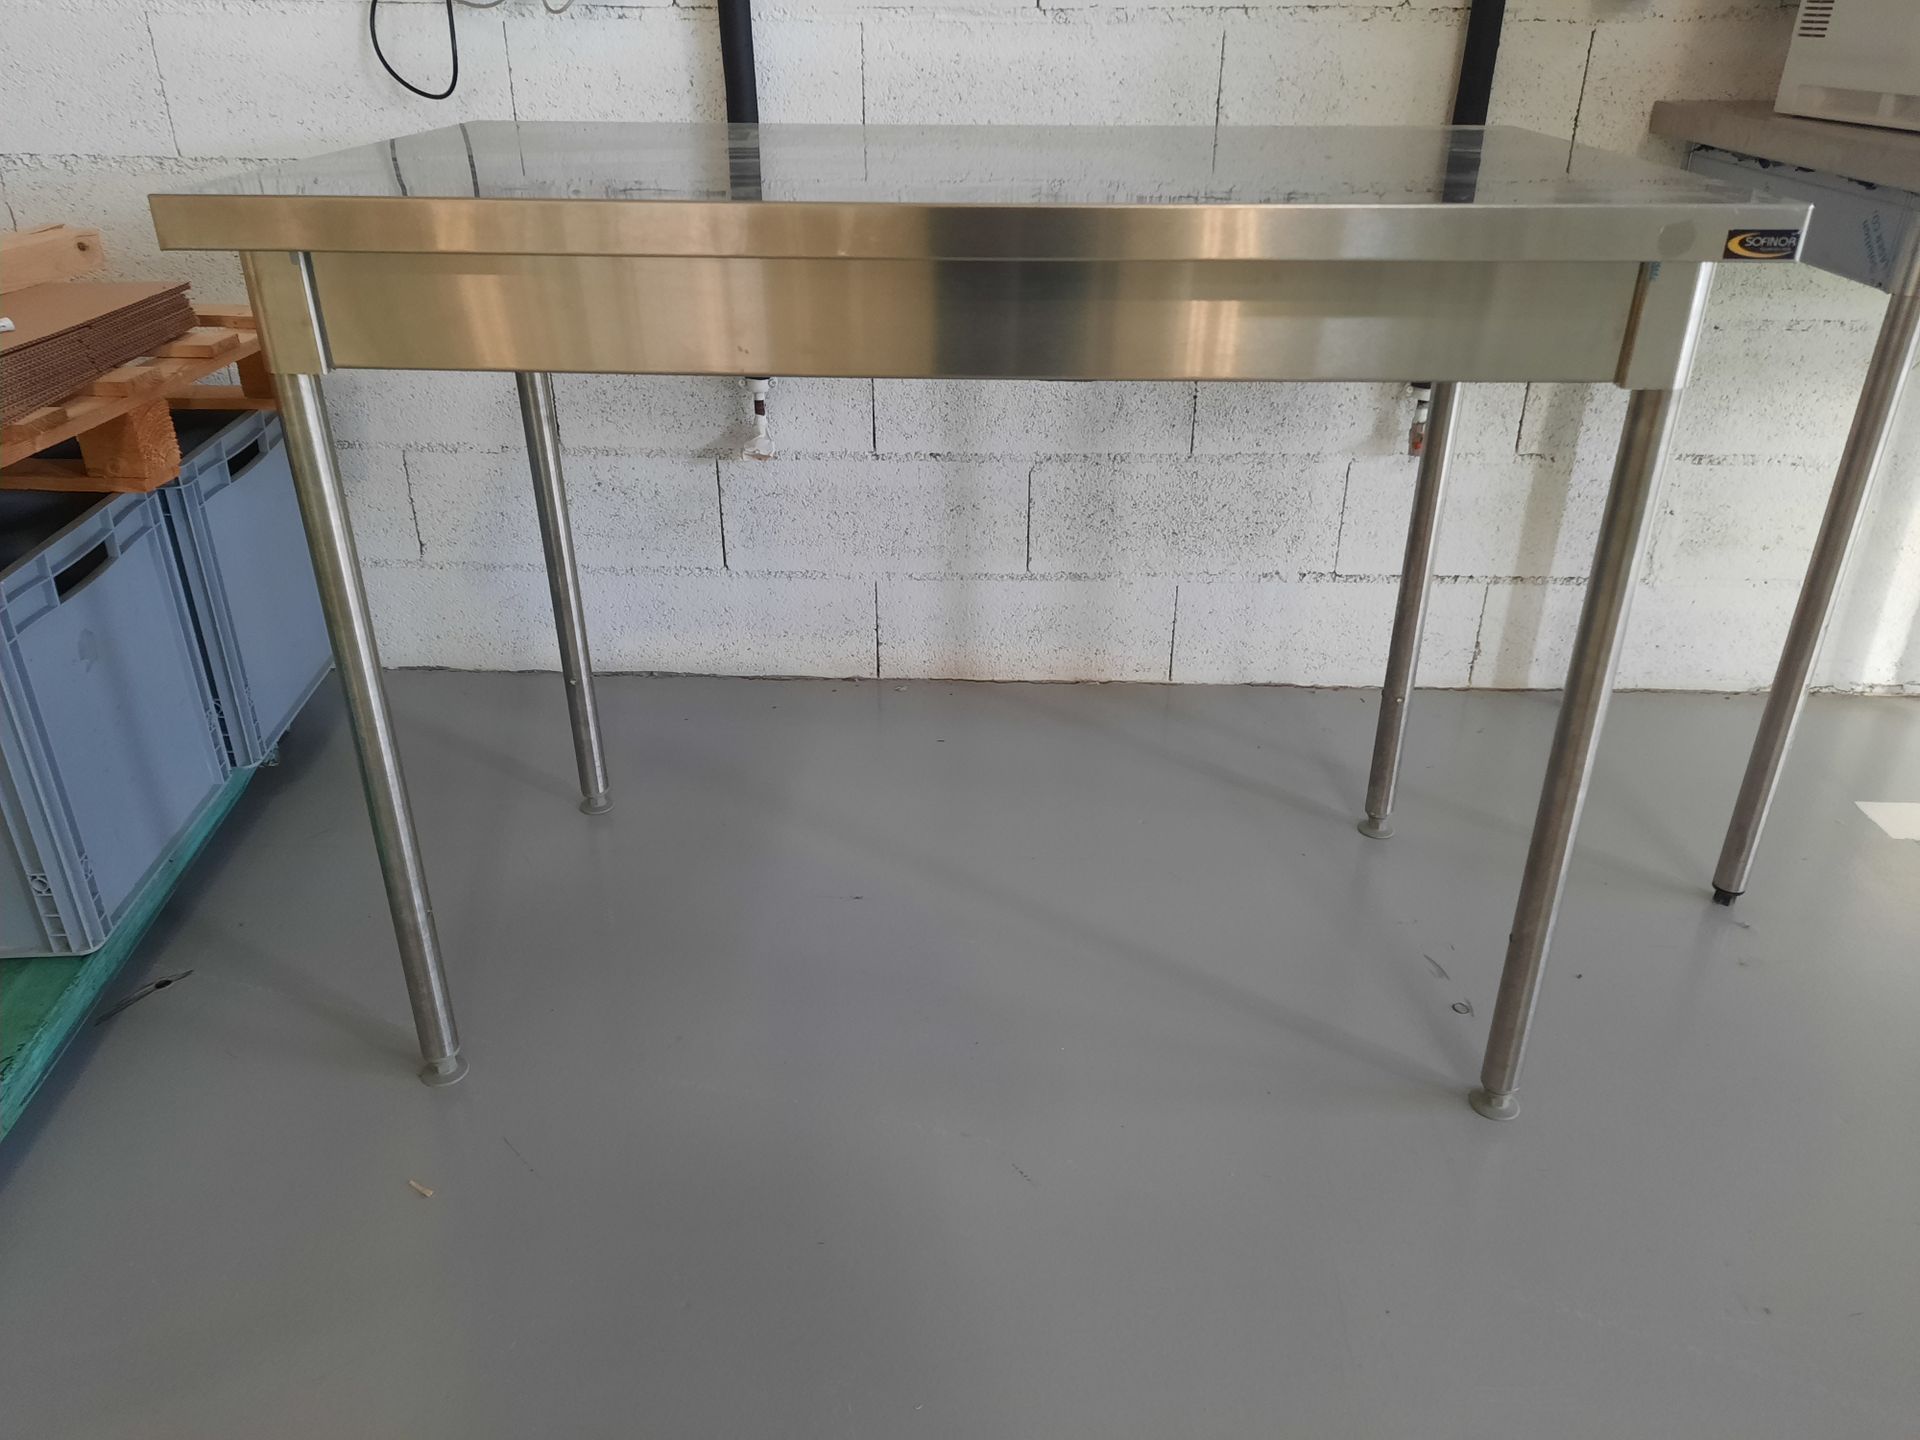 Null 1 set of 2 SOFINOR stainless steel tables, size 1,200 x 700 mm